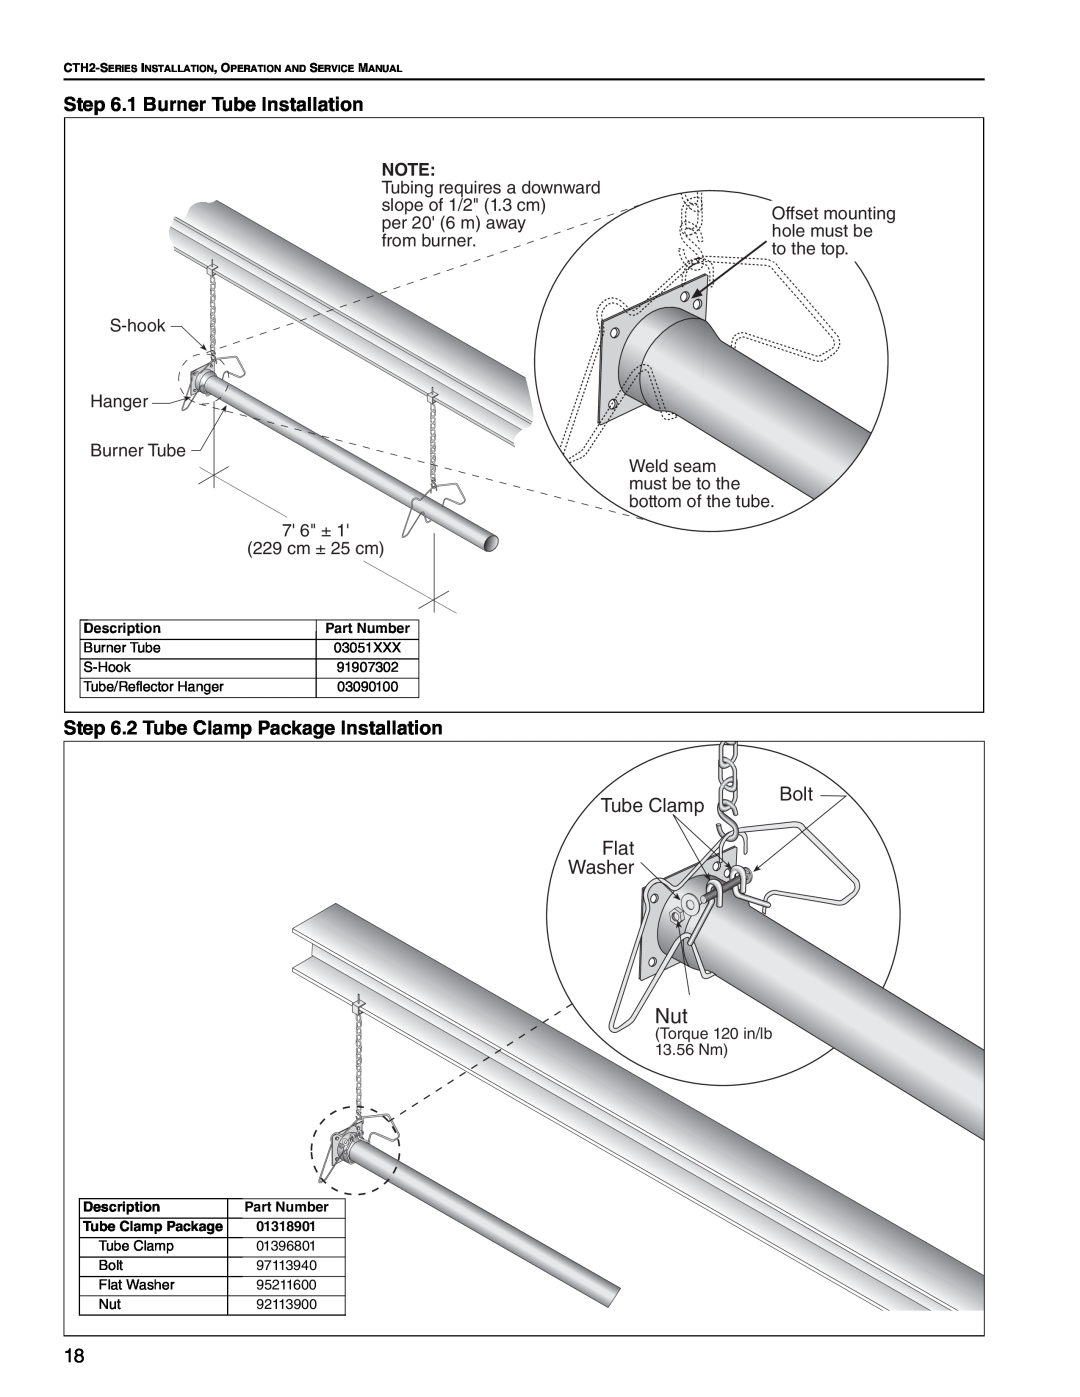 Roberts Gorden CTH2-125, CTH2-80 1 Burner Tube Installation, 2 Tube Clamp Package Installation, Bolt, Flat, Washer 